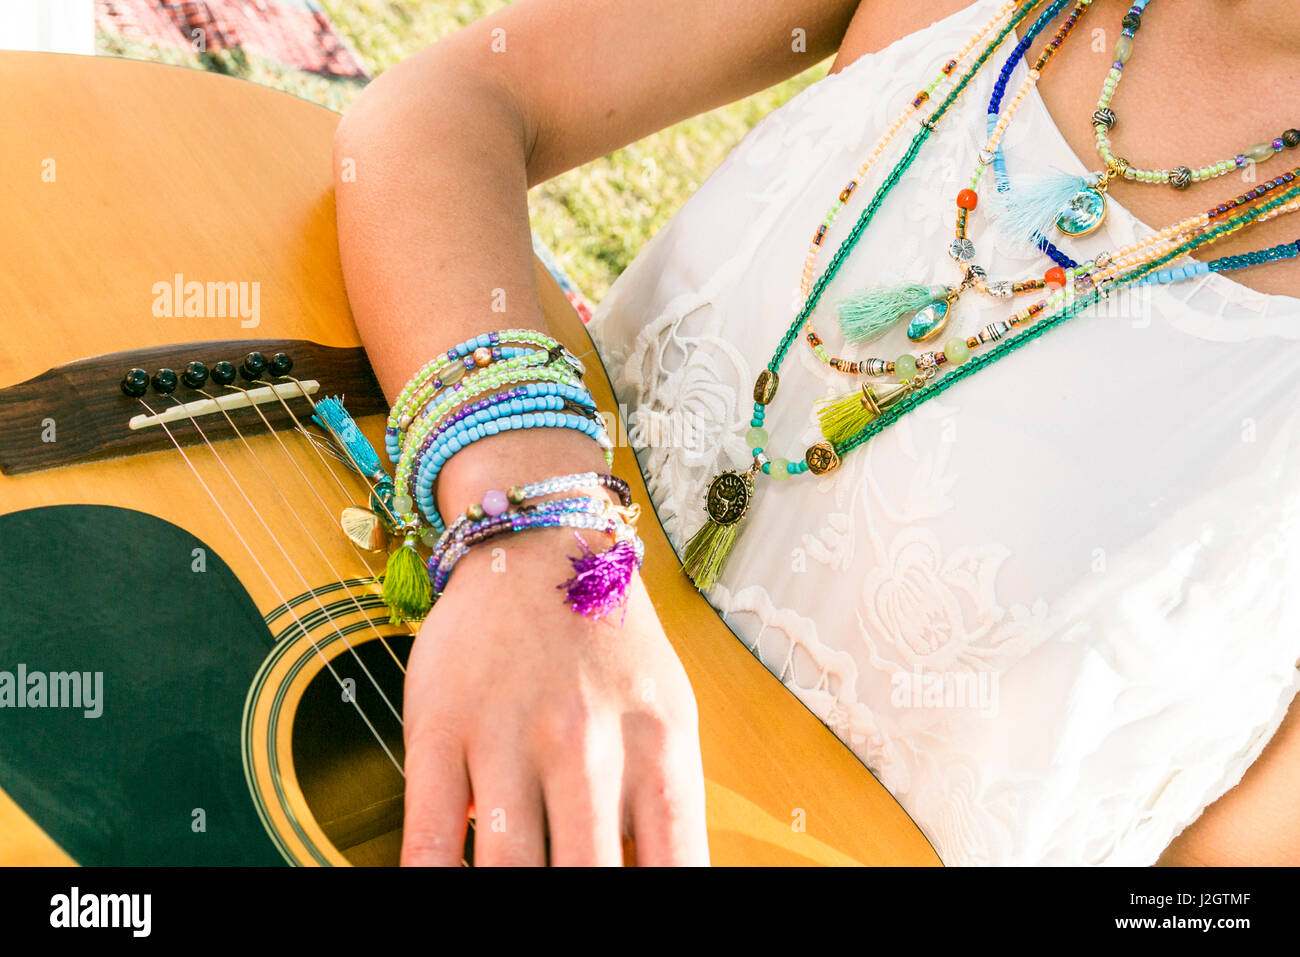 Young woman showing off Bottle Bead Jewelry, Santa Fe, New Mexico, USA. (MR) Stock Photo